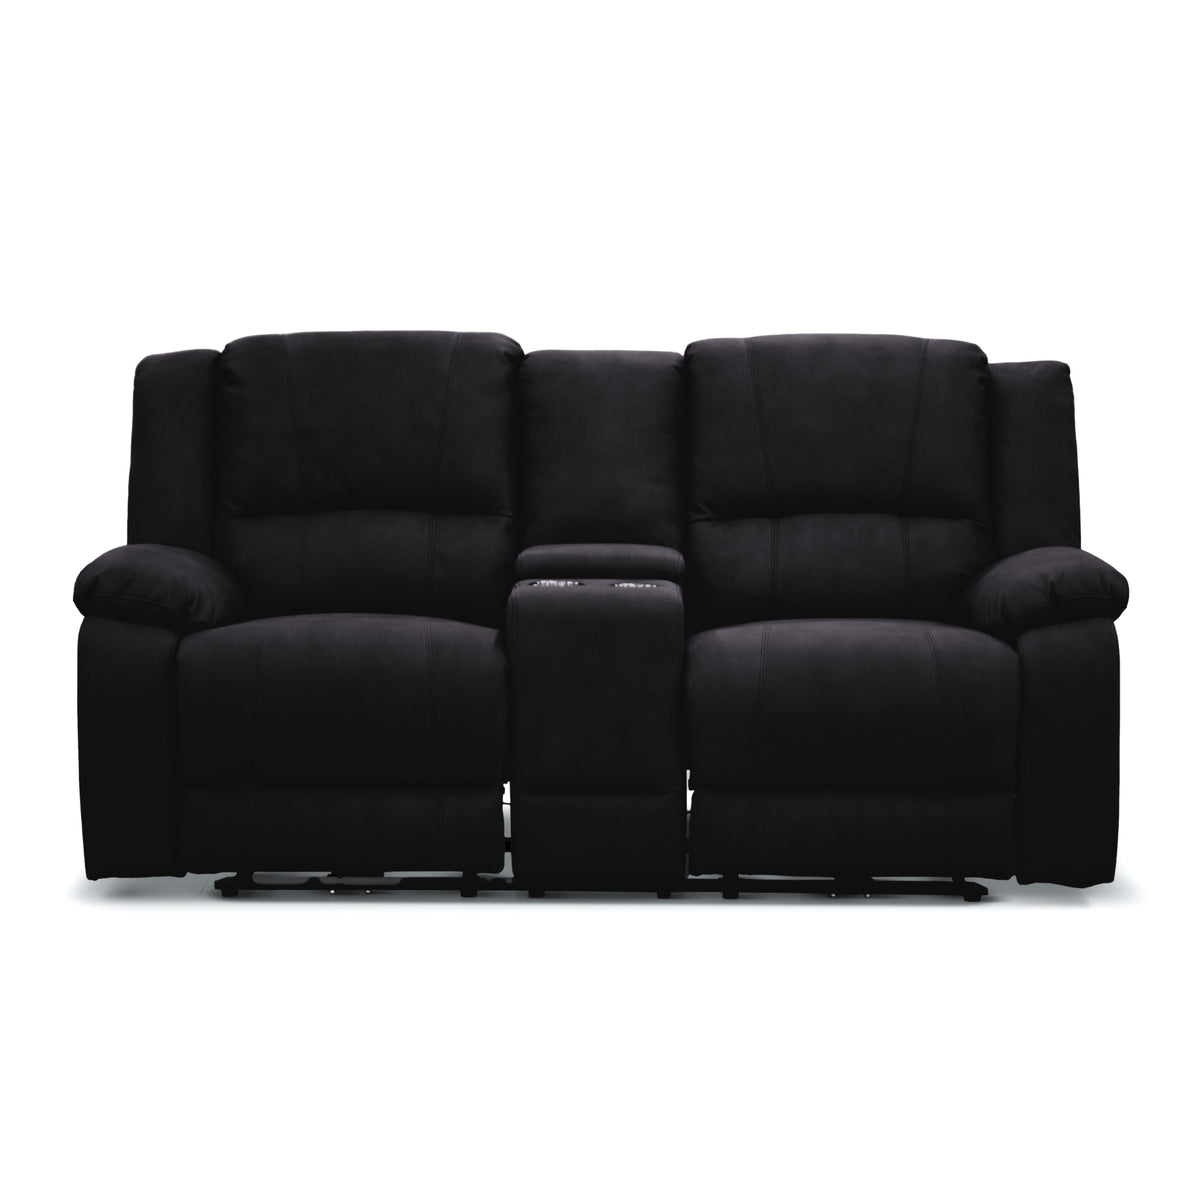 Anderson Fabric Electric Recliner Sofa Lounge Chair ONYX Black 2 Seater